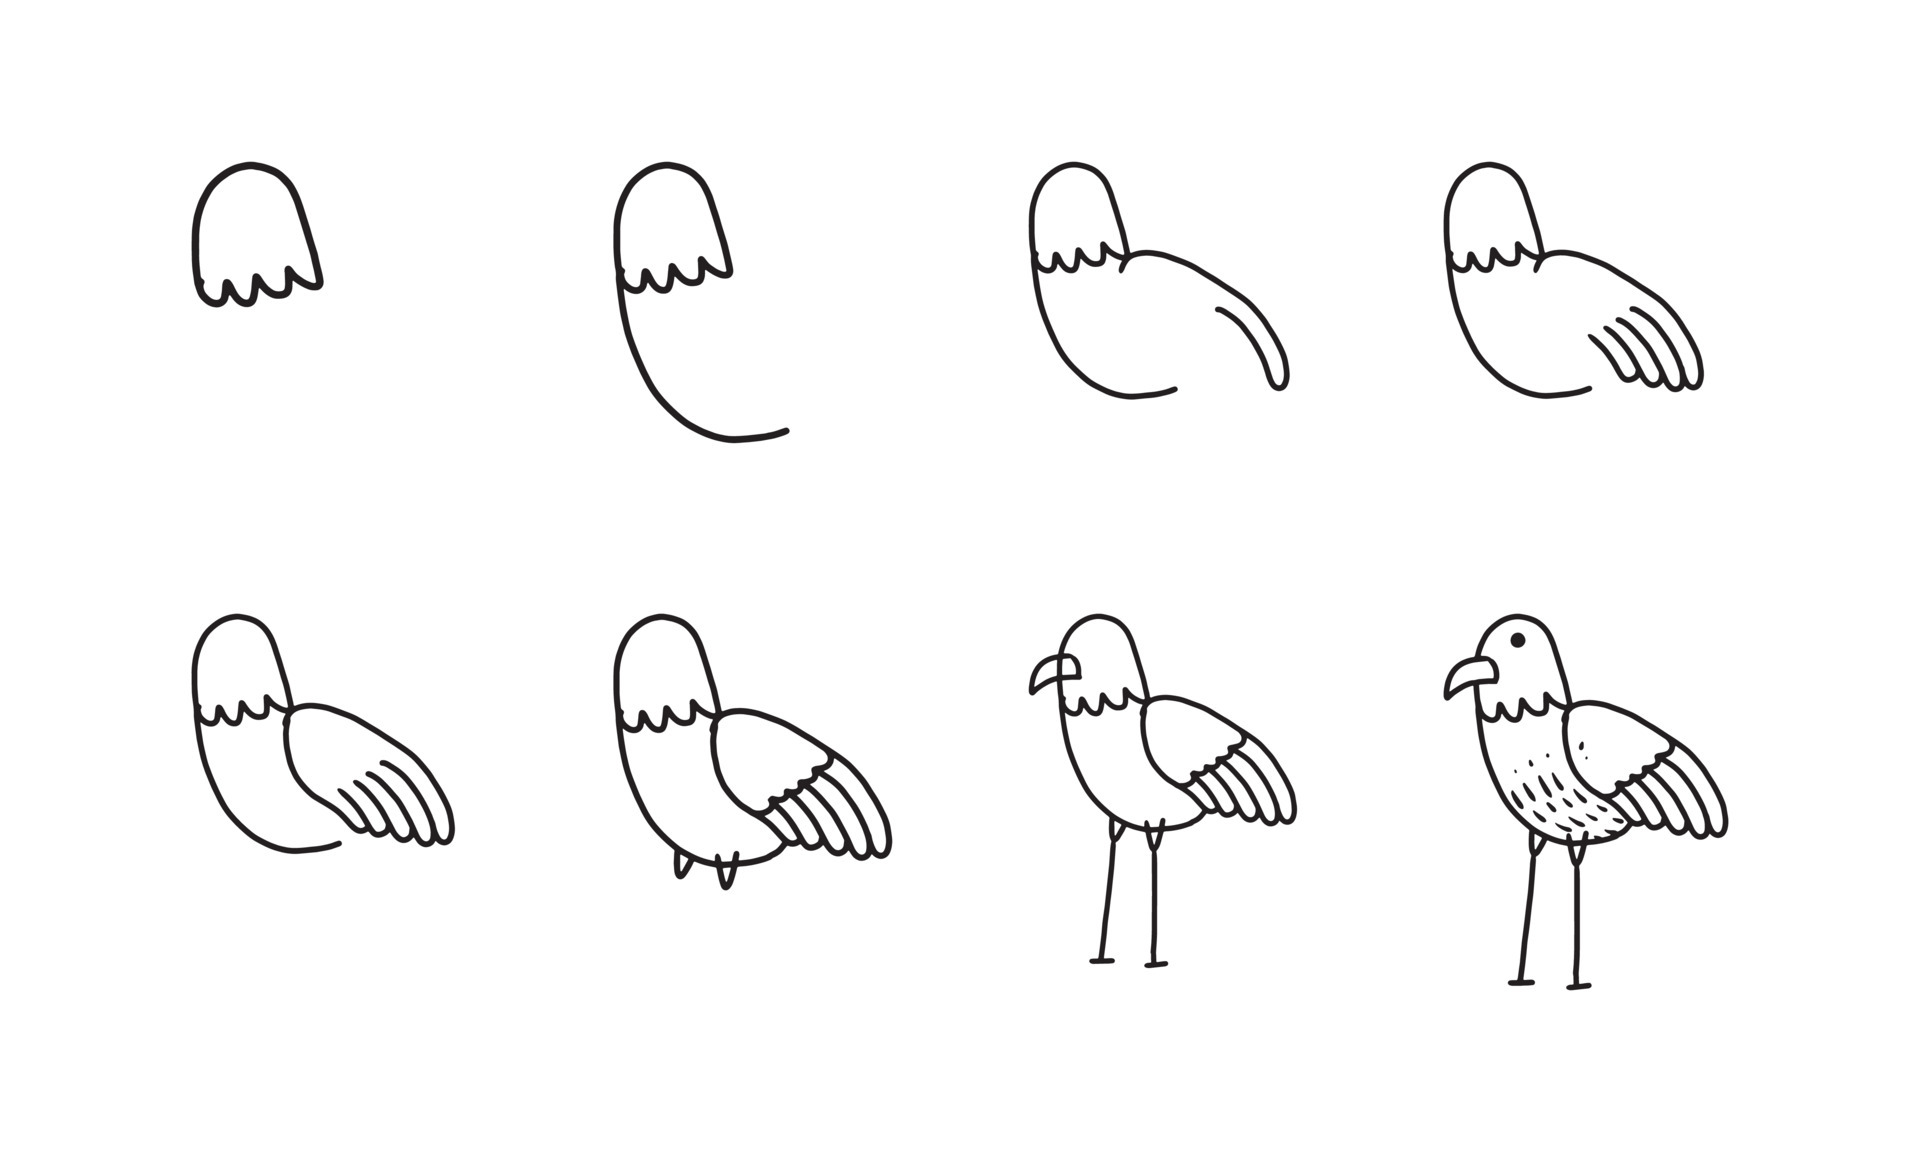 how to draw a cute bird step by step. pets animal cartoon coloring character  collection for kids. easy funny animal drawing illustration for kids  creativity. drawing guide book in vector design. 4677657